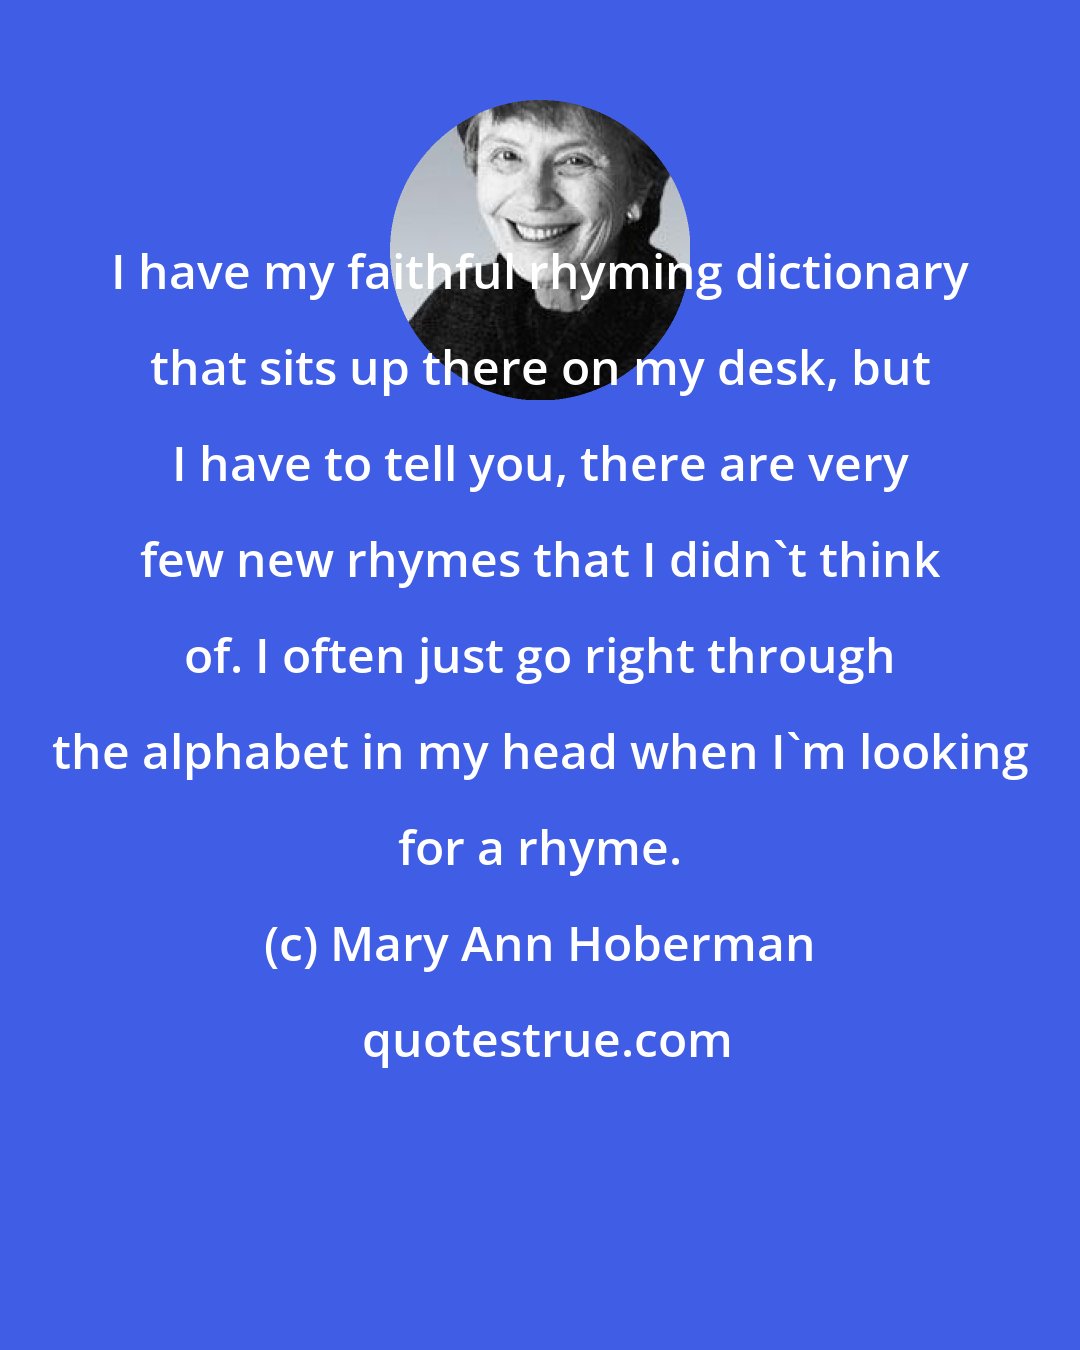 Mary Ann Hoberman: I have my faithful rhyming dictionary that sits up there on my desk, but I have to tell you, there are very few new rhymes that I didn't think of. I often just go right through the alphabet in my head when I'm looking for a rhyme.